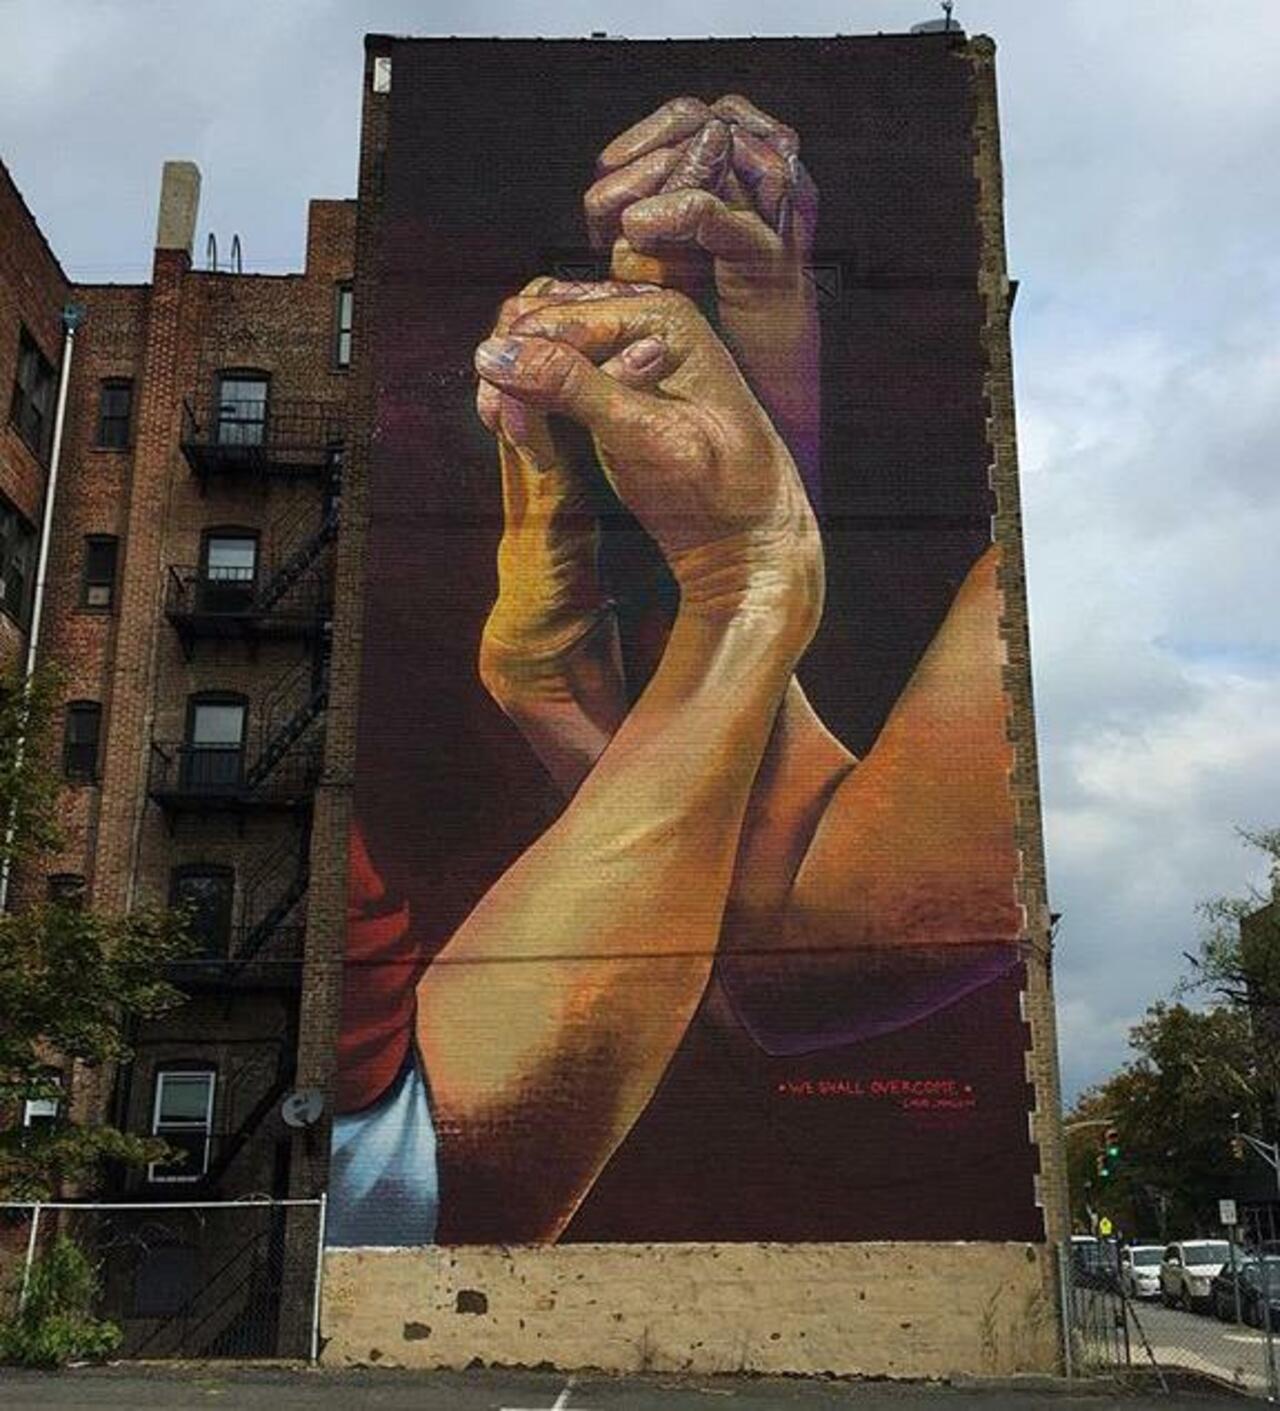 New Street Art by CaseMaclaim in Jersey City for the TheBKcollective 

#art #graffiti #mural #streetart http://t.co/HdeWJY4Iou